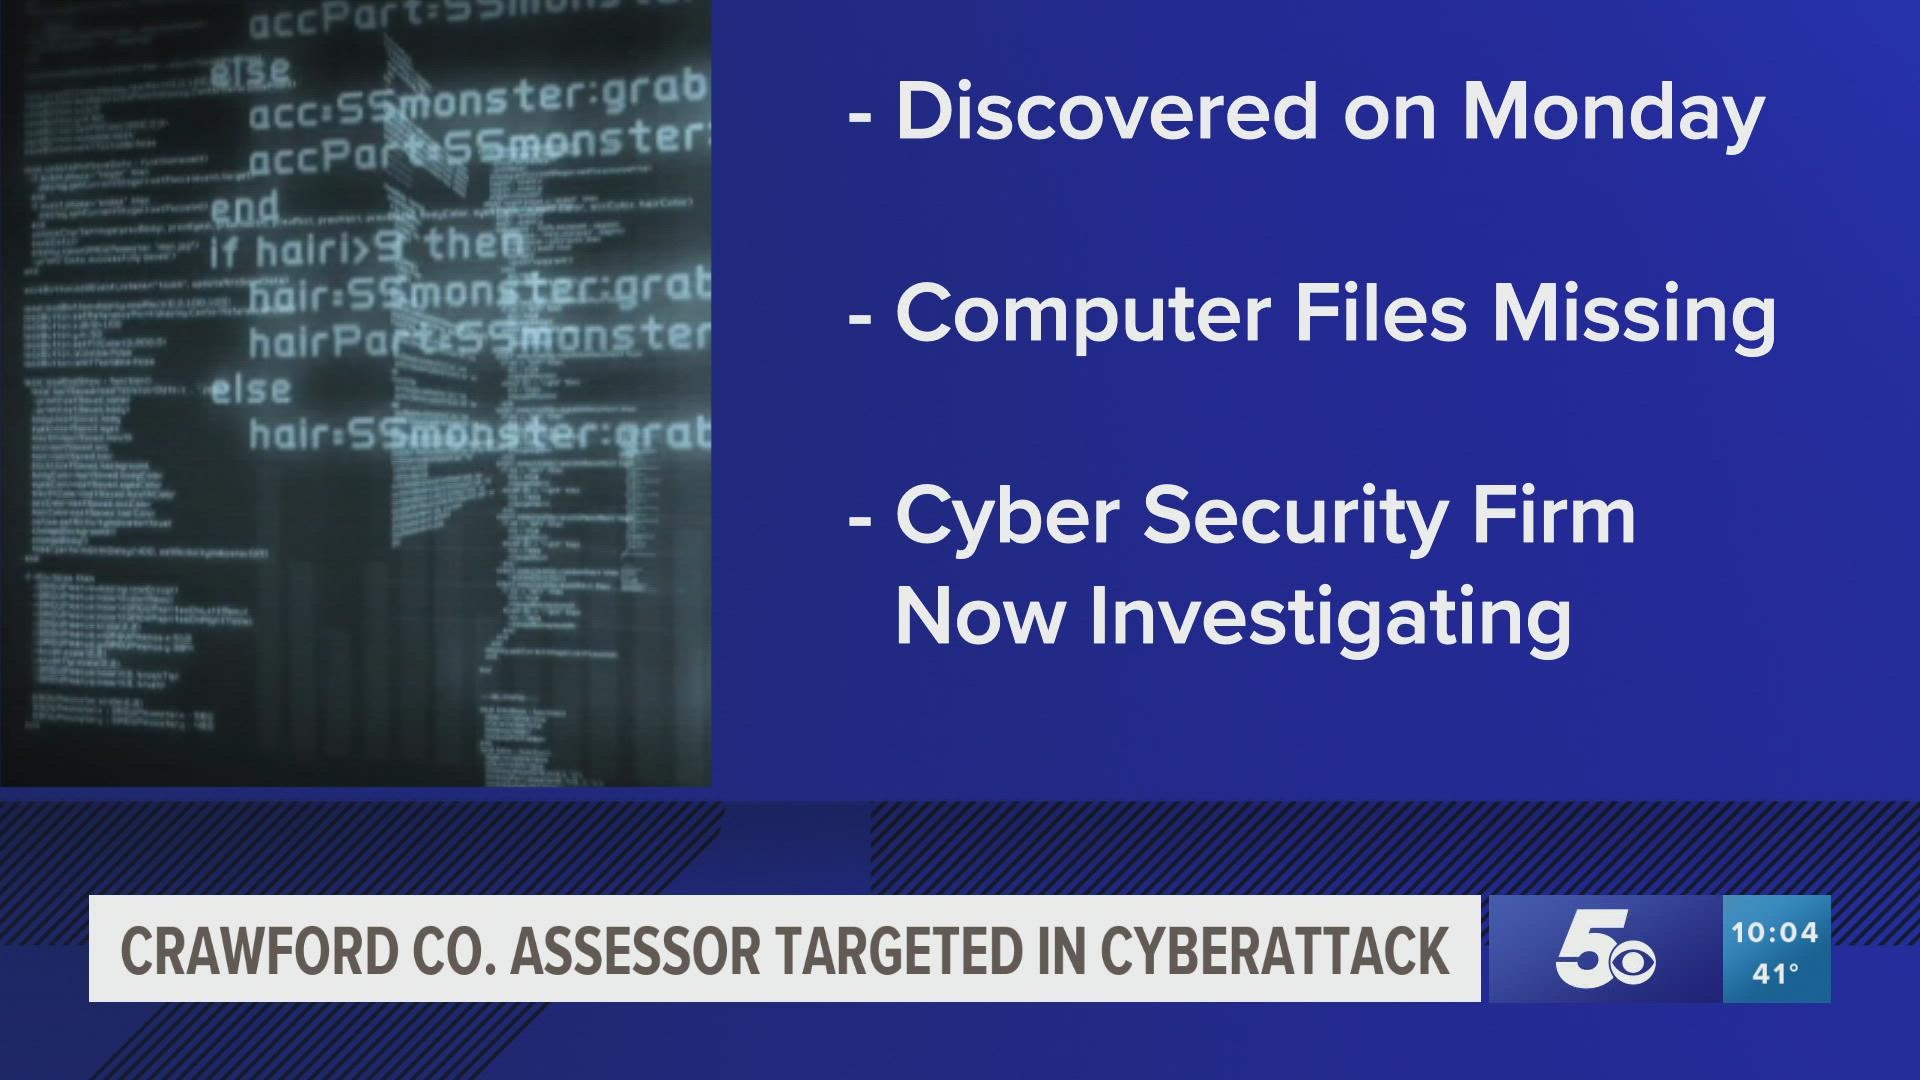 The Crawford County Assessor's Office is the latest public entity to be hit by a cyberattack.